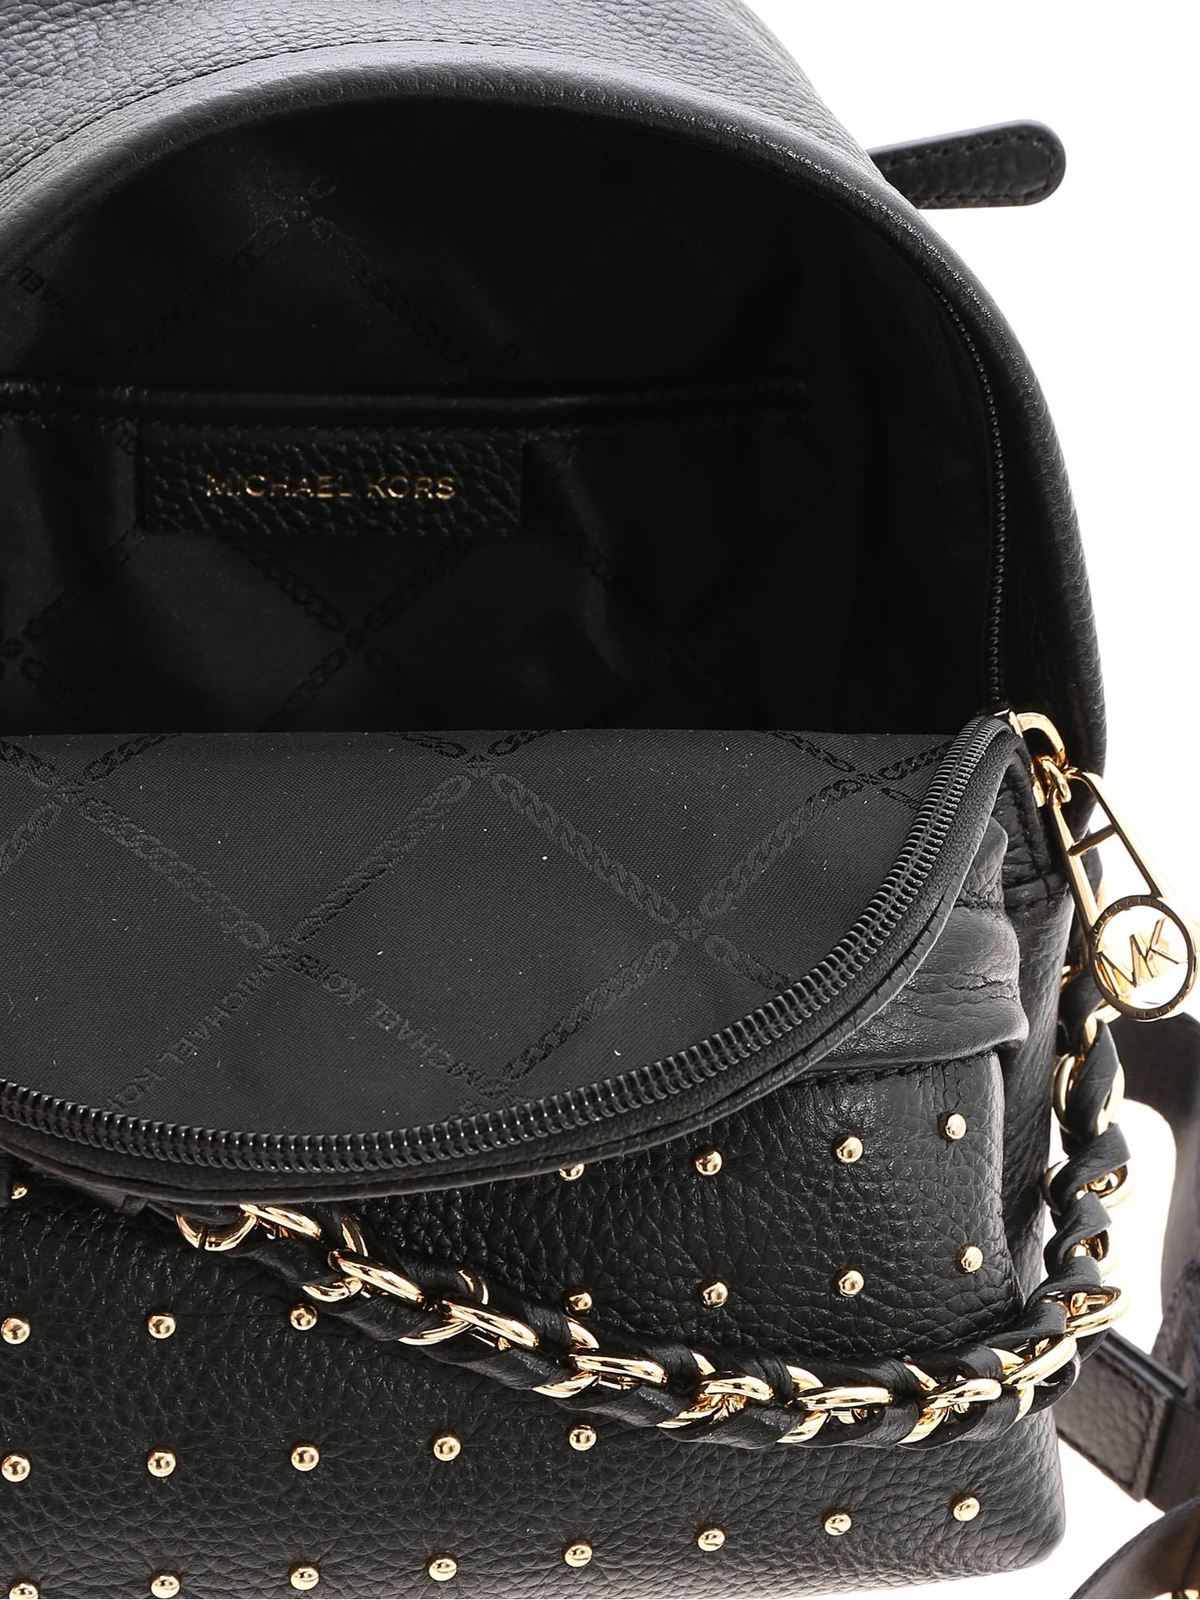 michael kors black backpack with gold studs